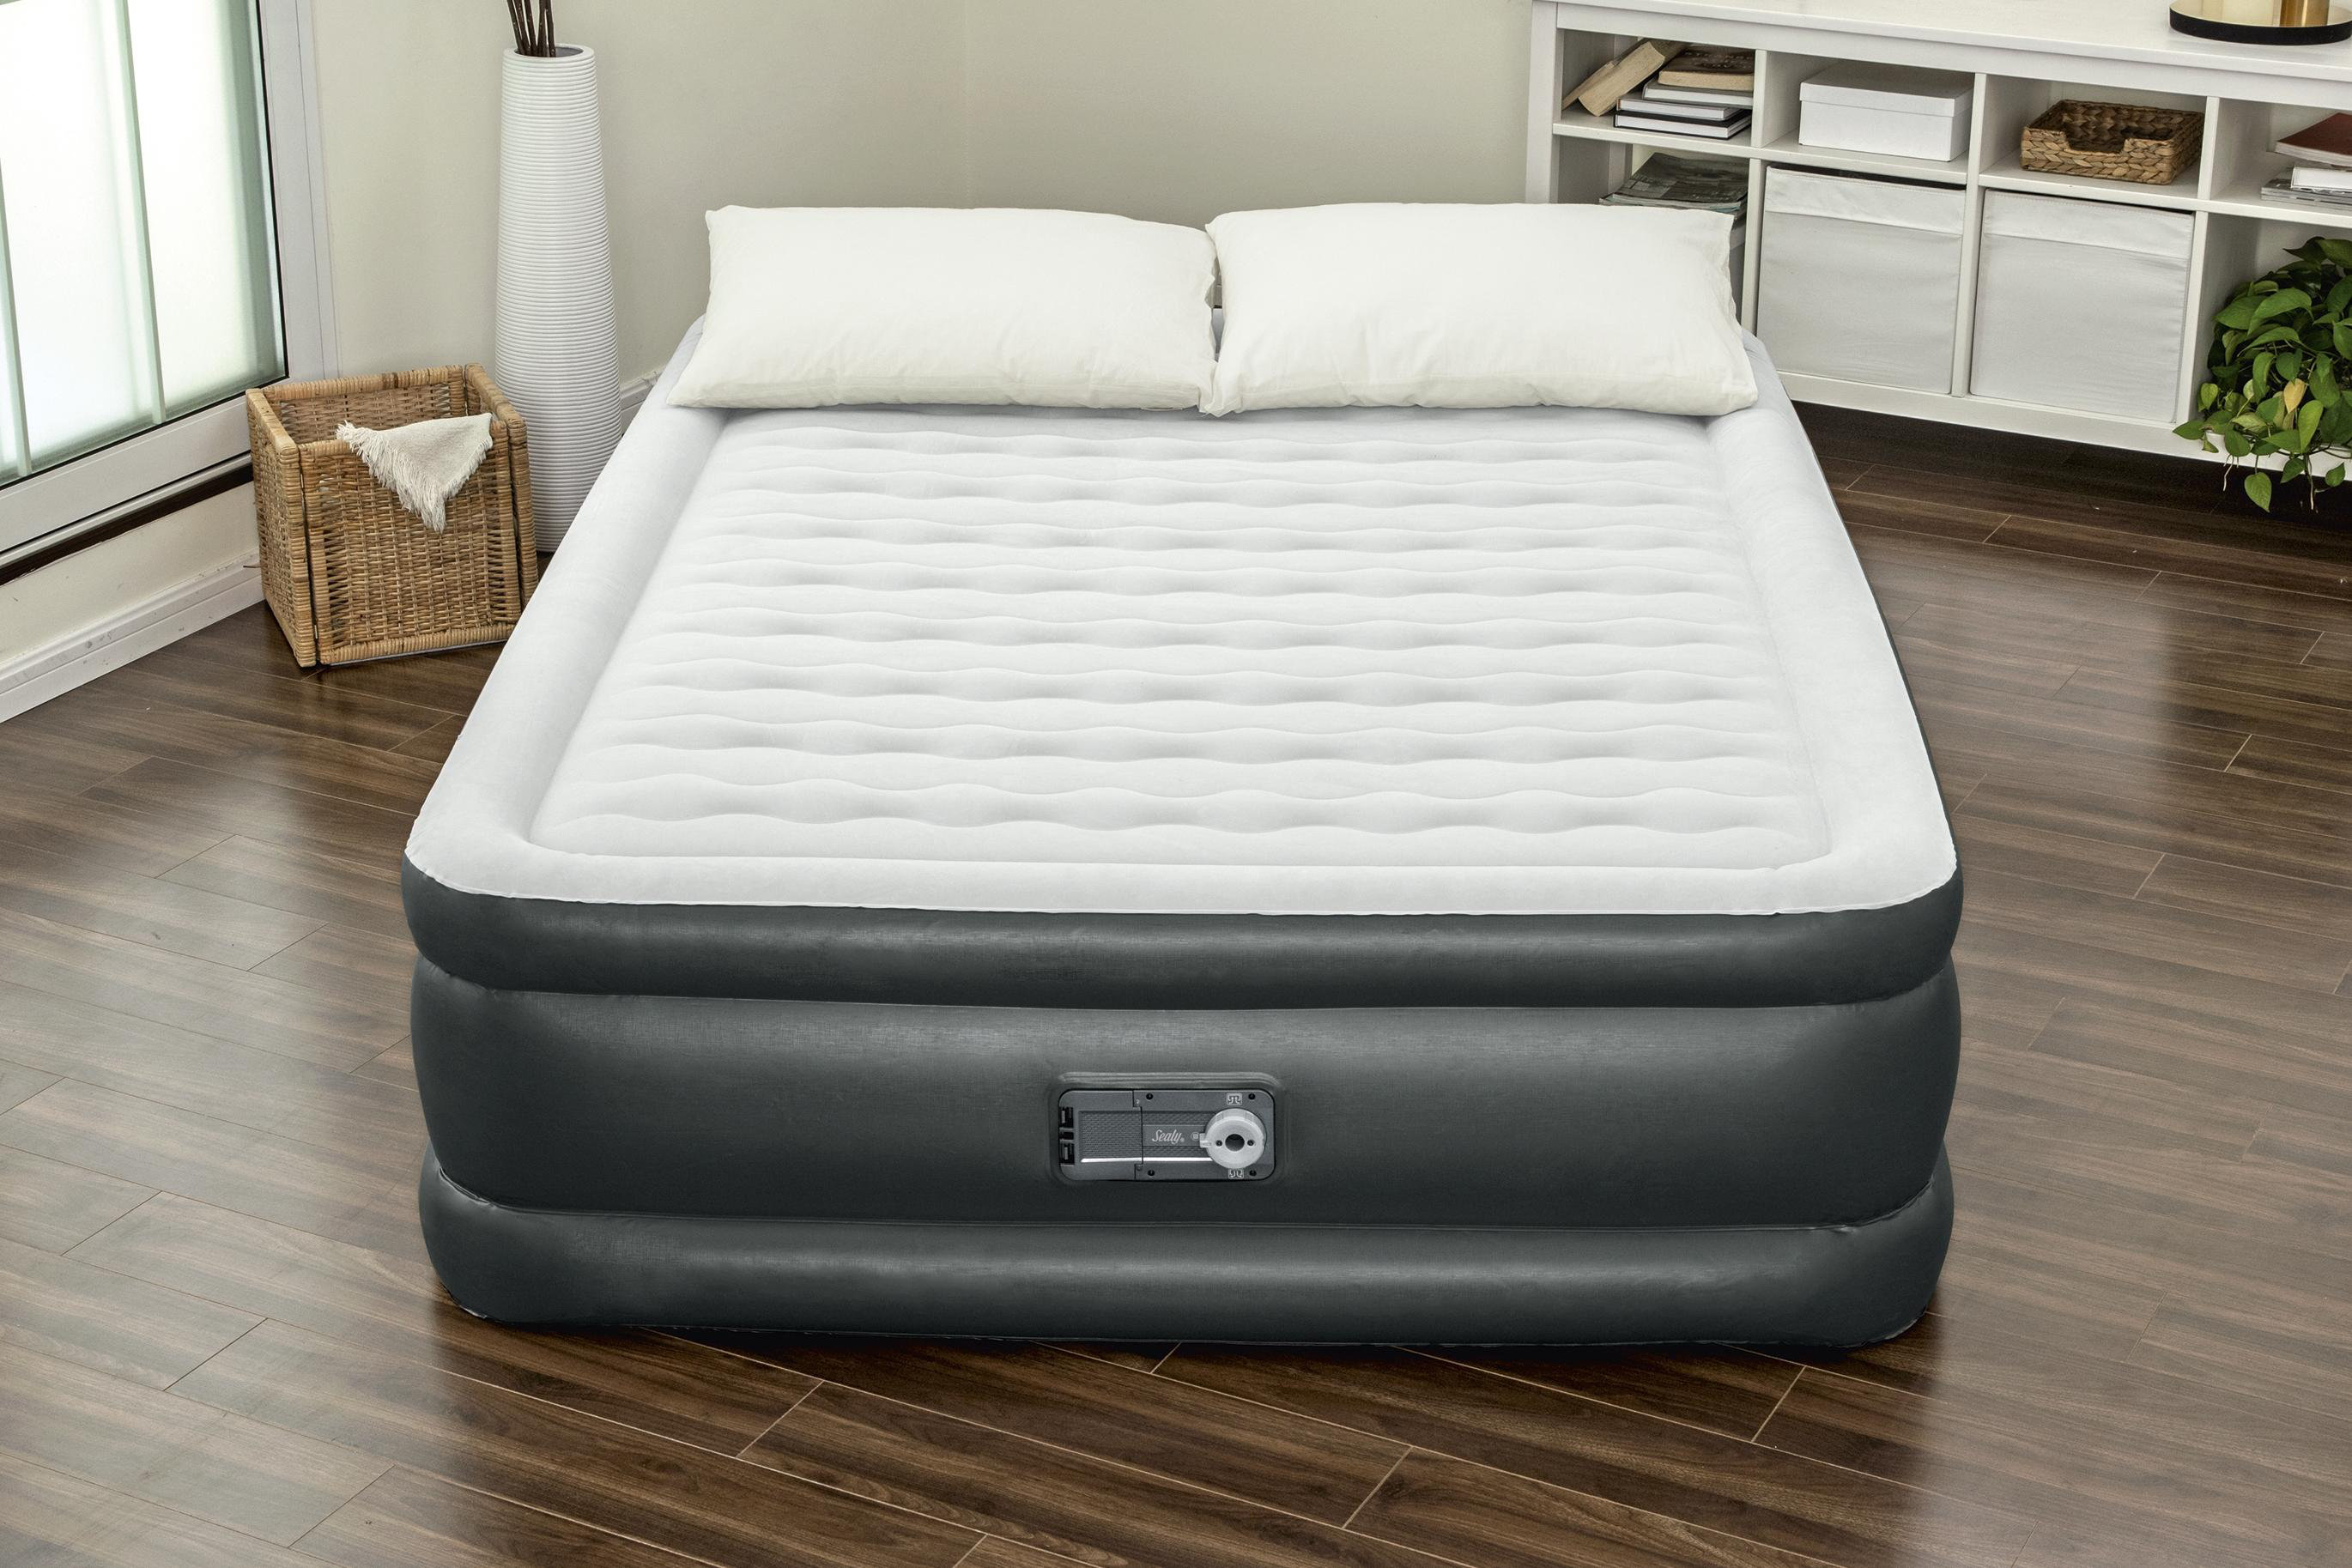 best rated inflatable mattress twin